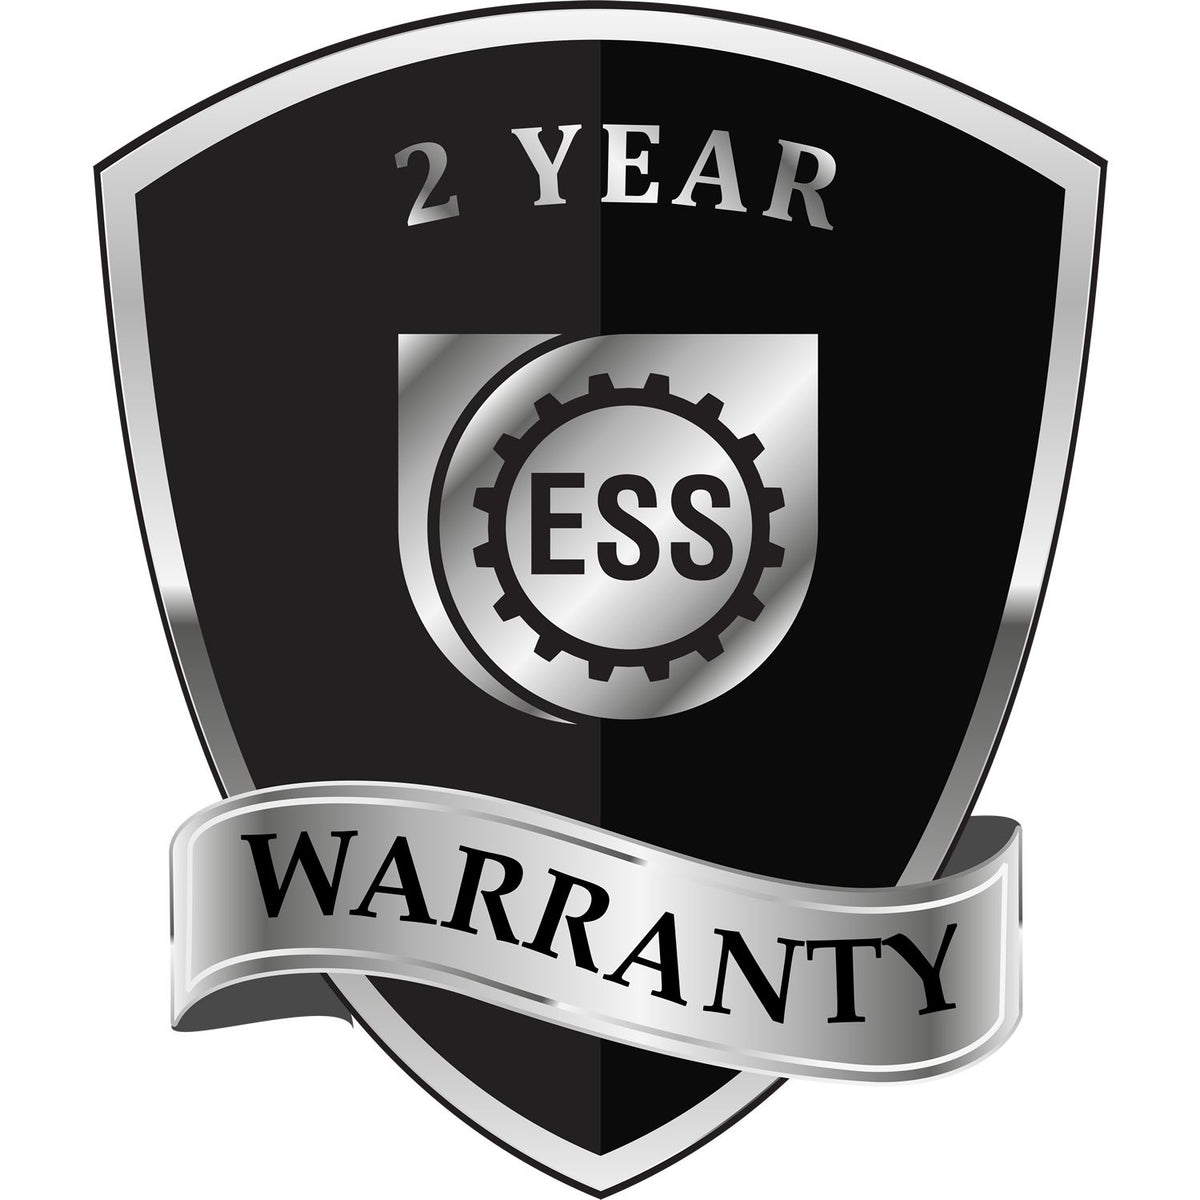 A black and silver badge or emblem showing warranty information for the Hybrid Wyoming Landscape Architect Seal